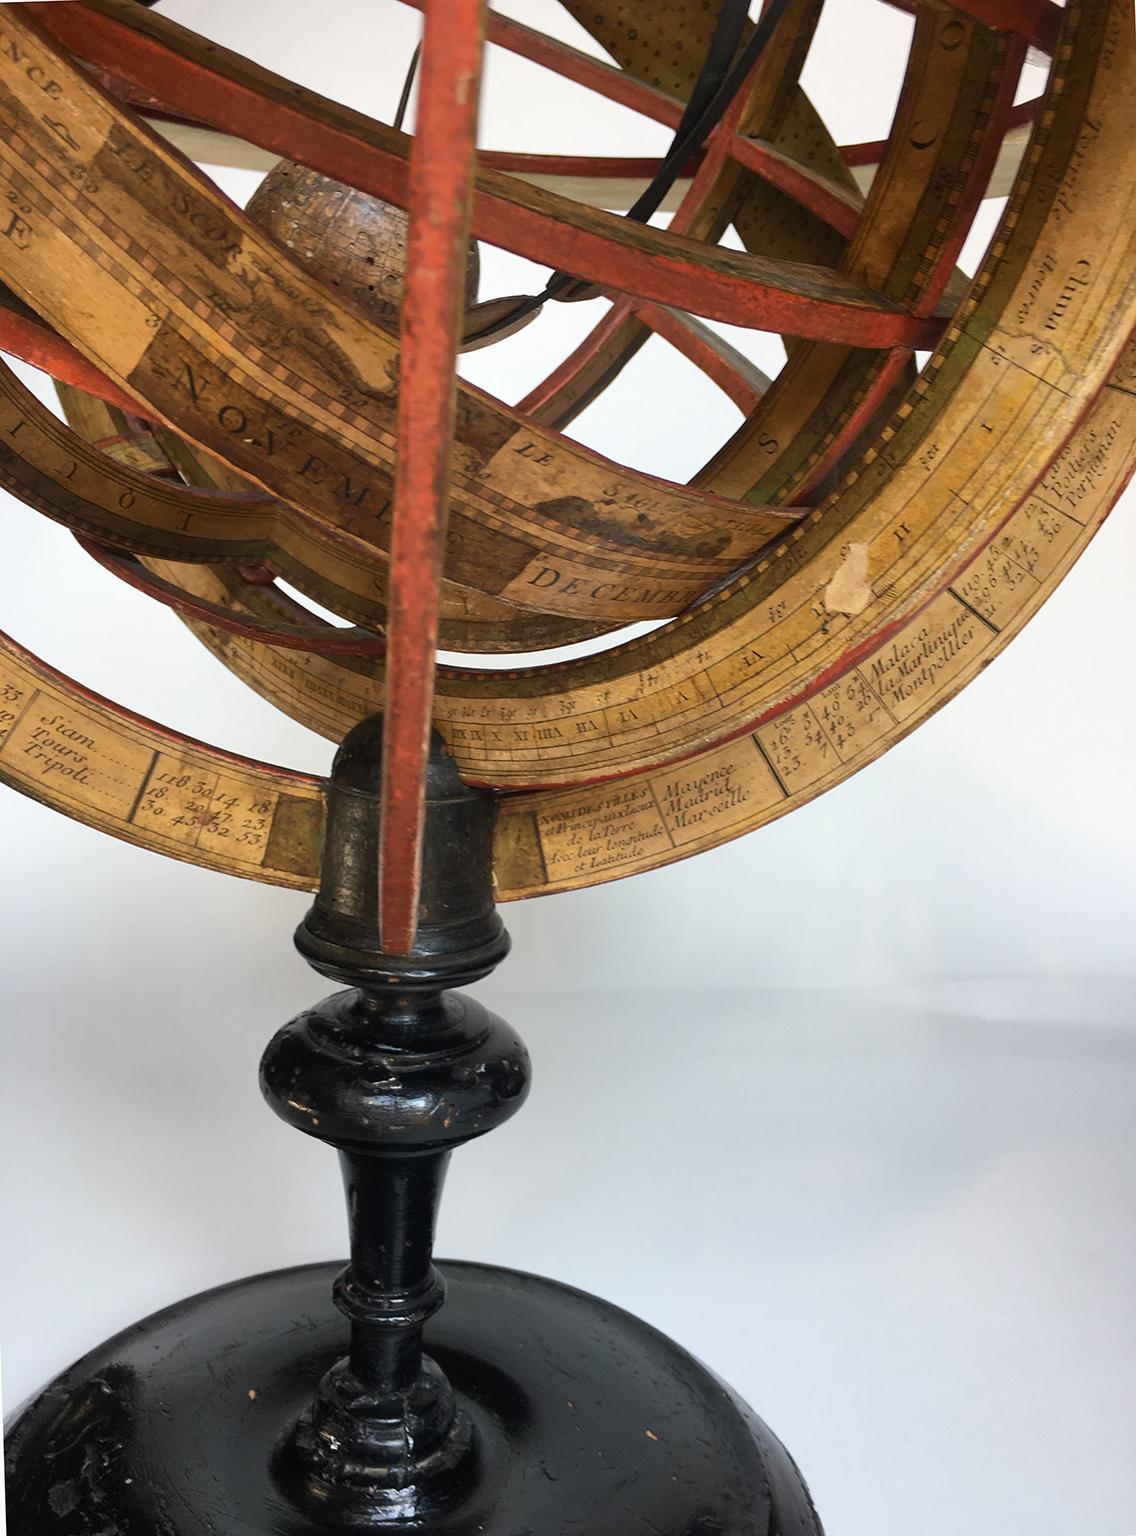 Paper 18th Century French Planetarium and Armillary Sphere by L.-C. Desnos, 1754